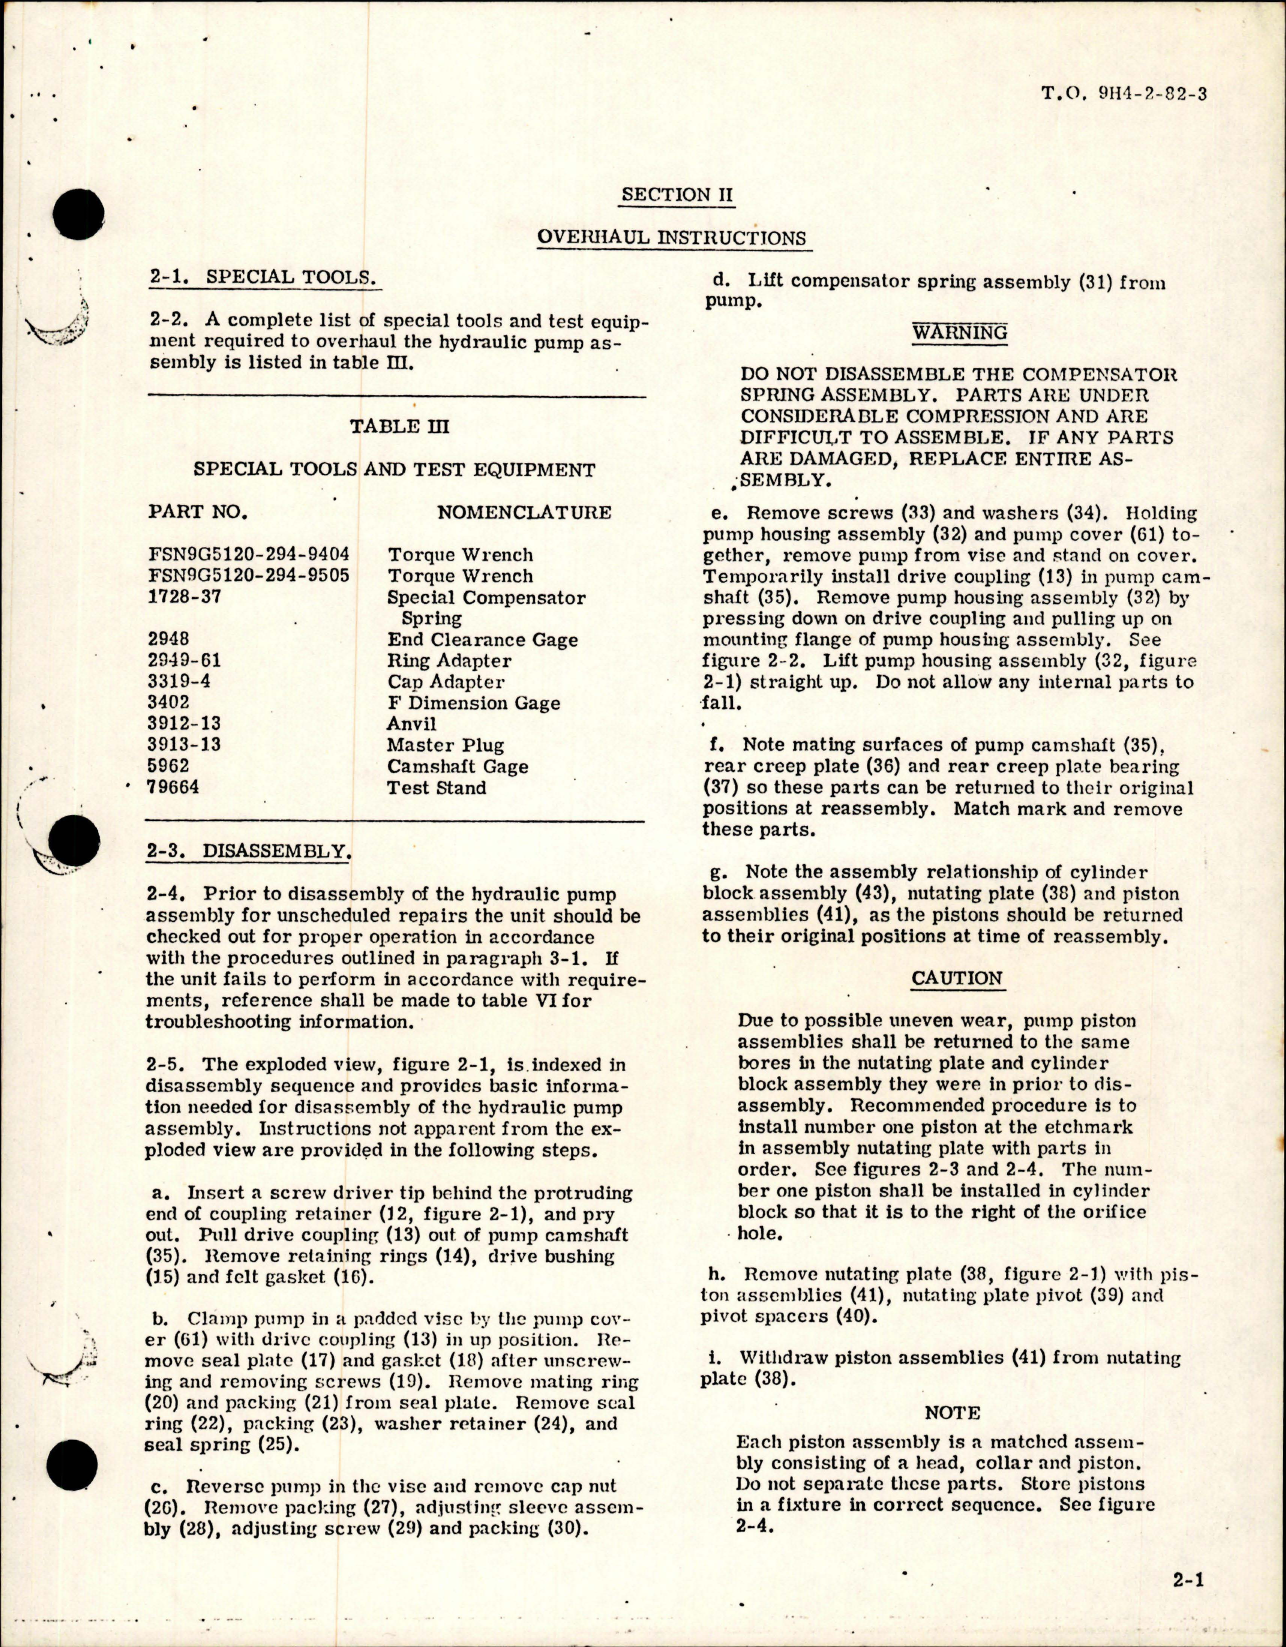 Sample page 7 from AirCorps Library document: Overhaul Manual for Hydraulic Pump Assembly - Part 66YF400-1 